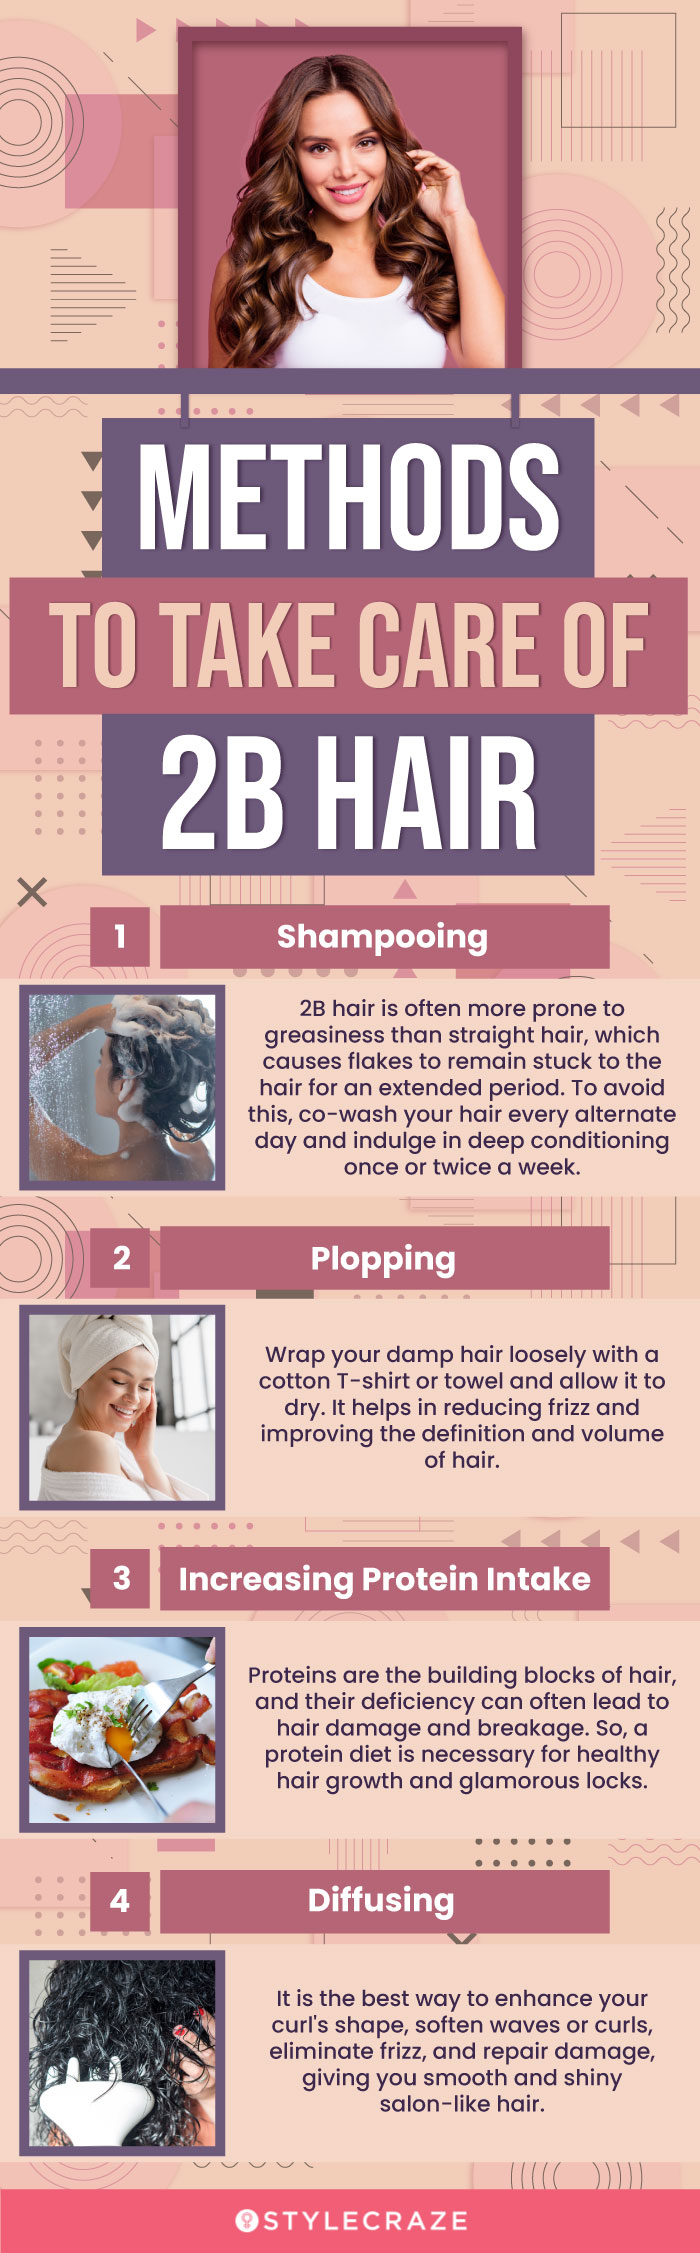 methods to take care of 2b hair (infographic)